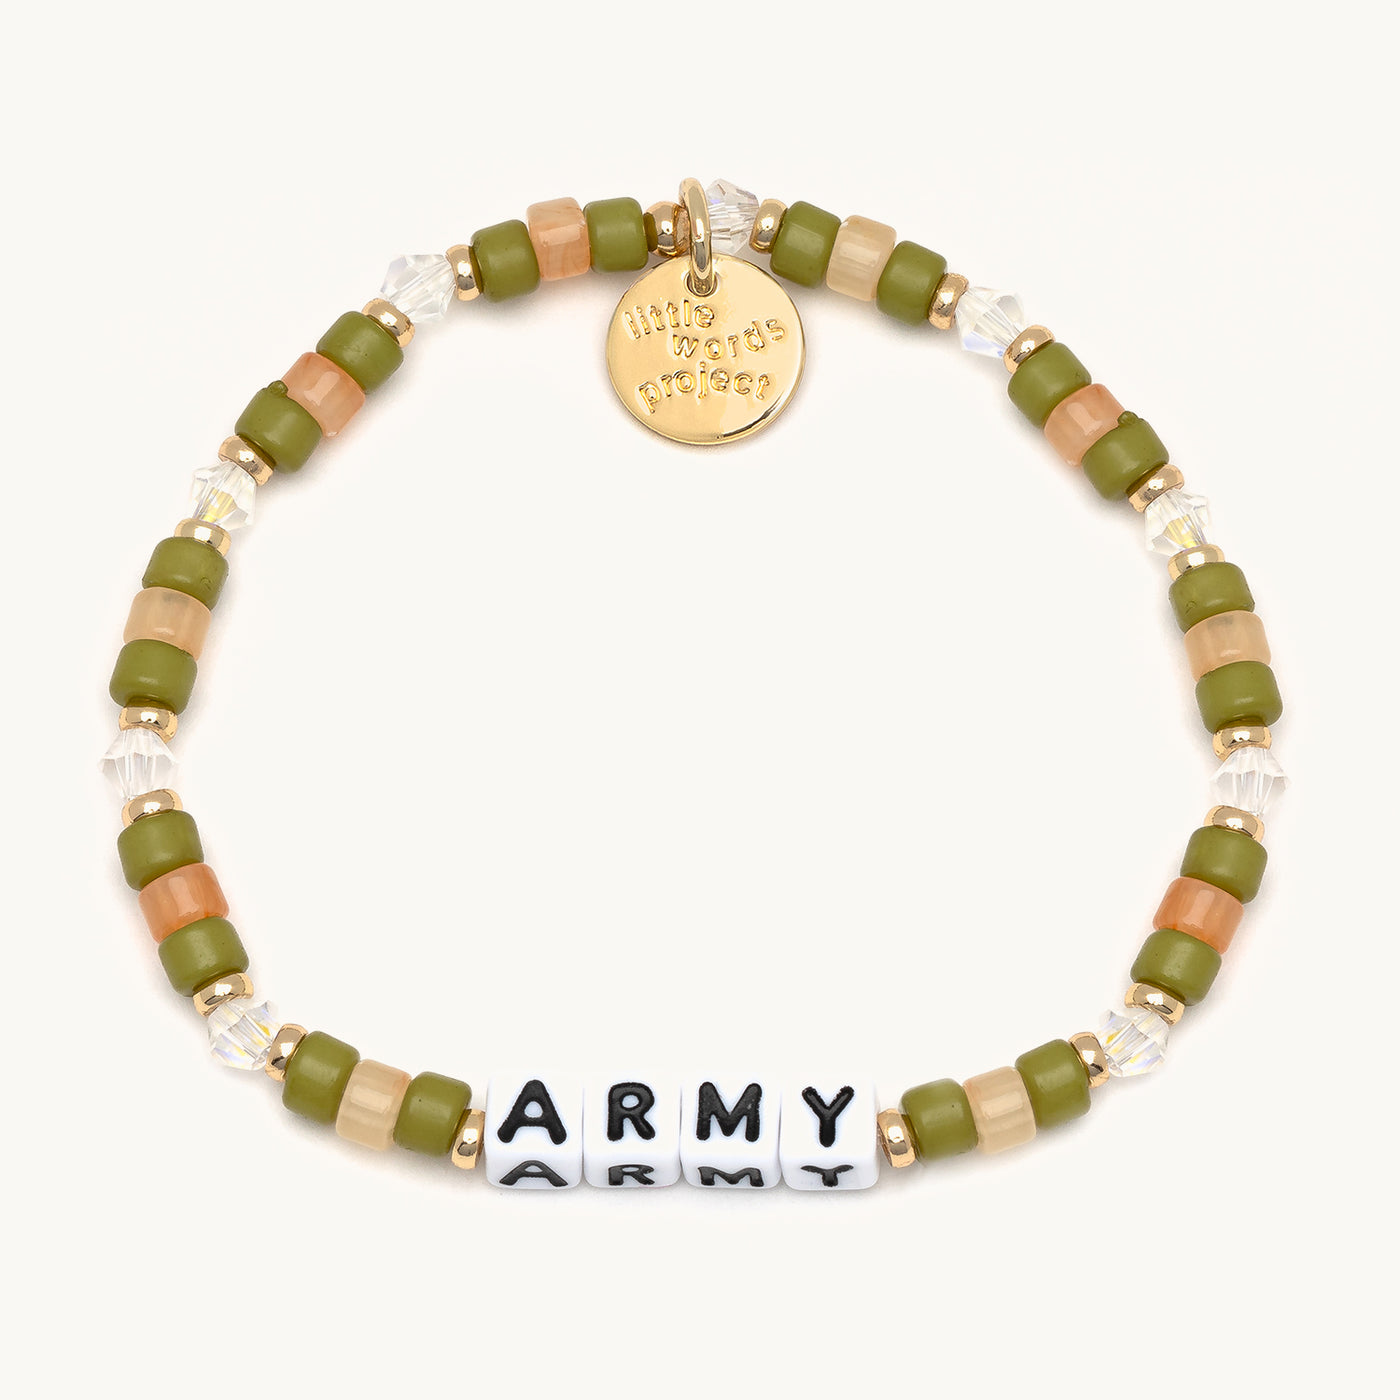 Army - Everyday Heroes - Bracelet - Little Words Project